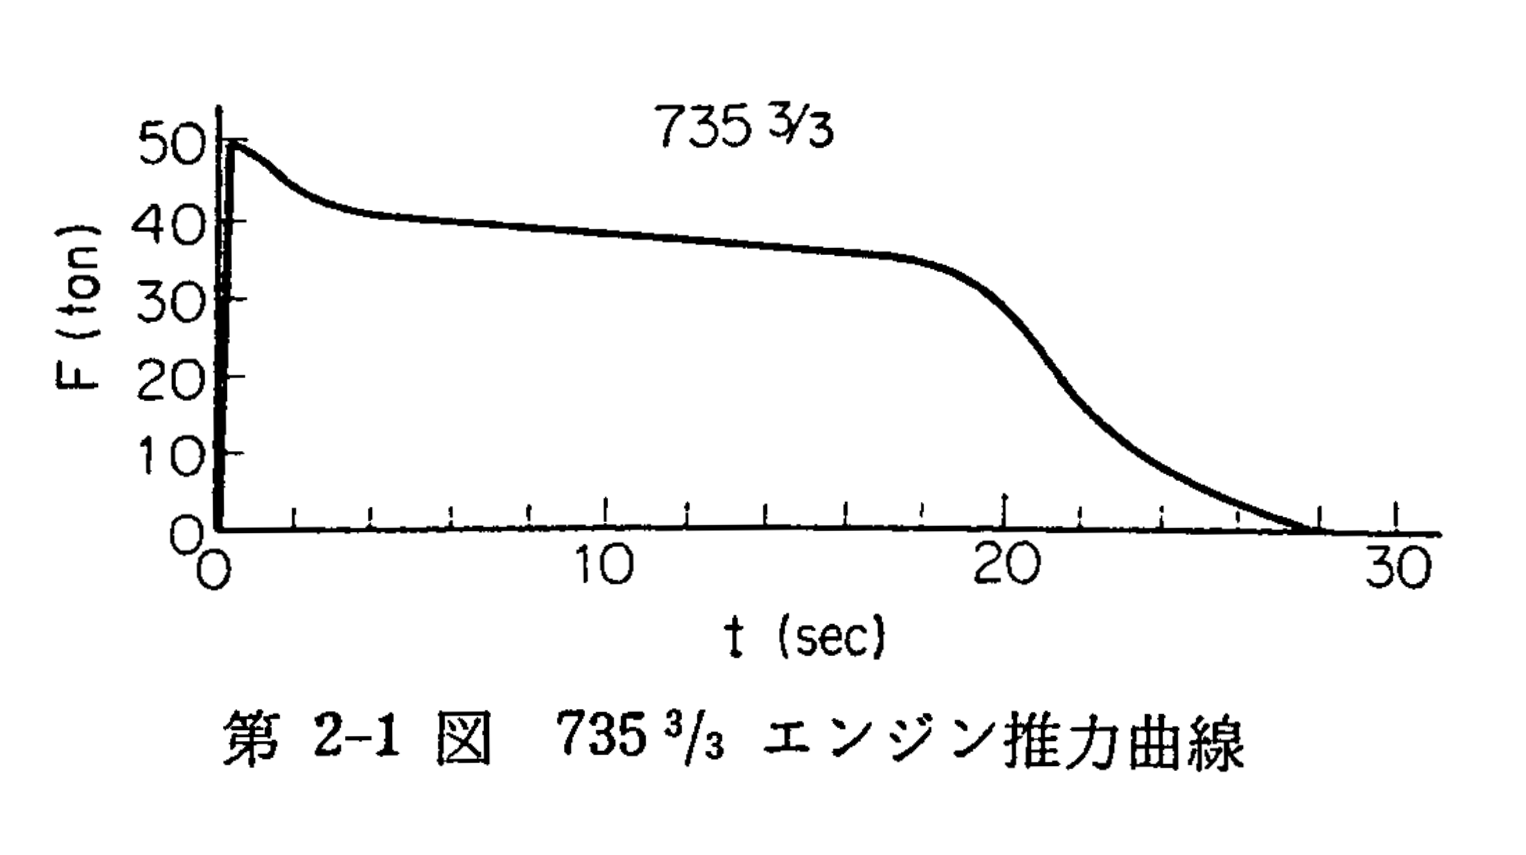 Photocopied chart: Lambda first stage  thrust curve